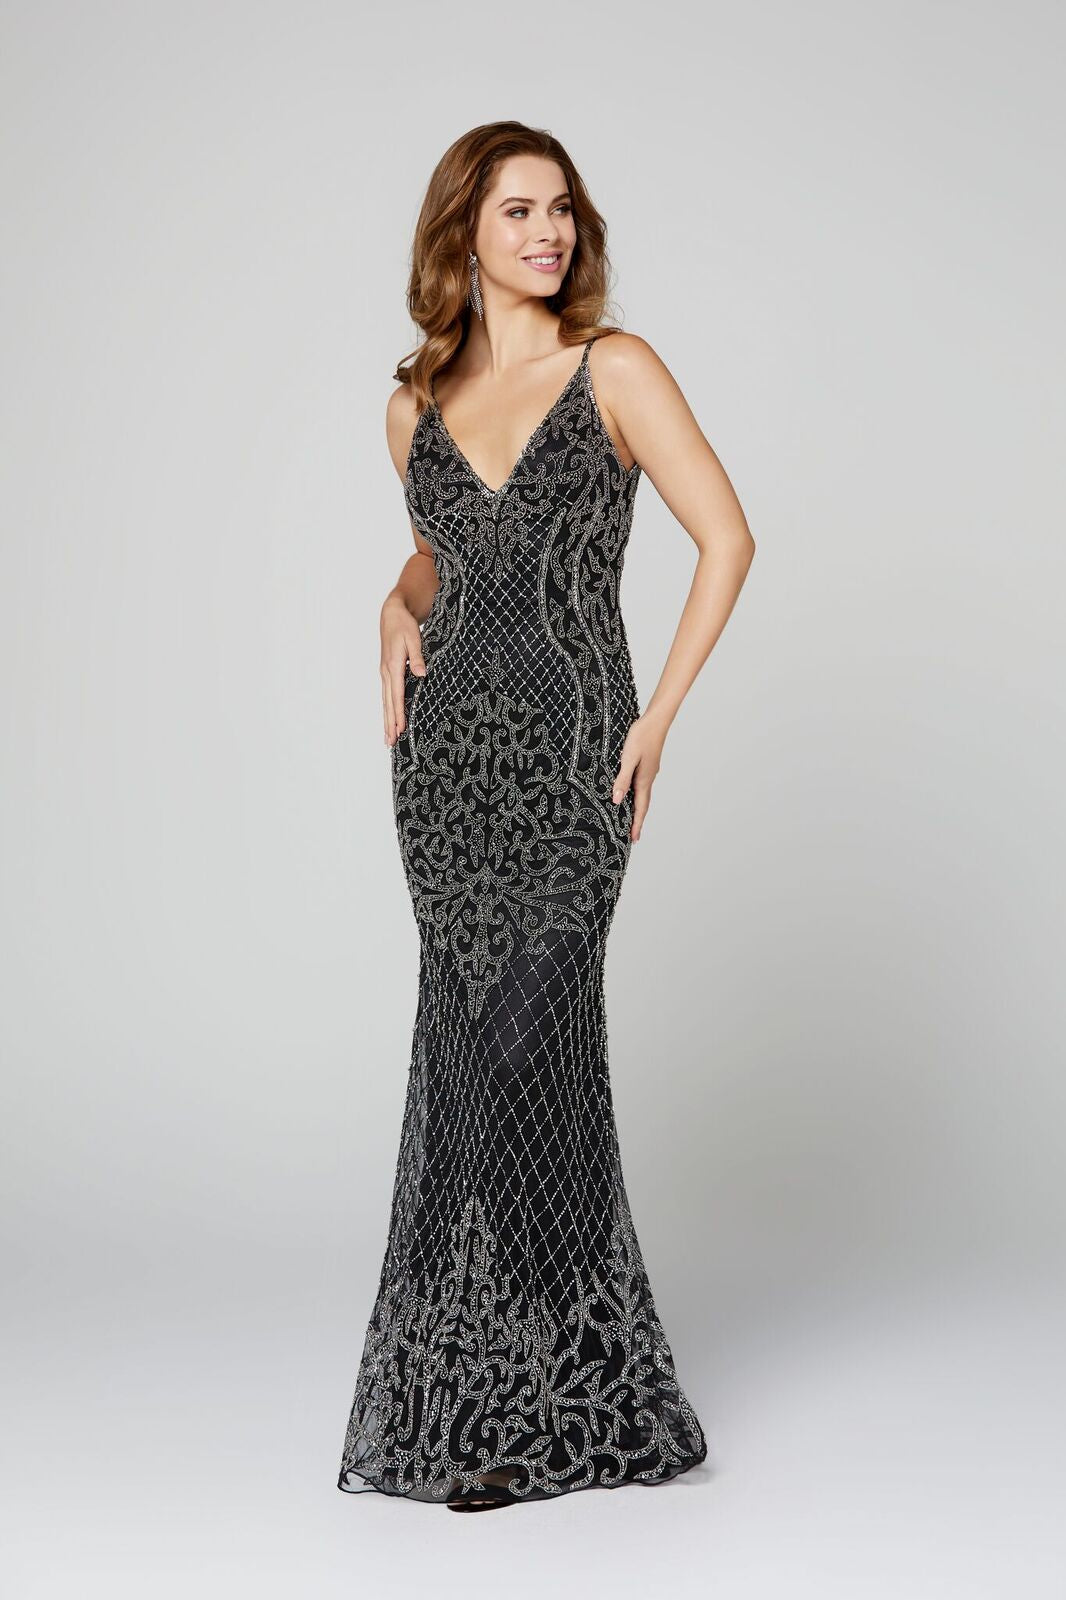 Primavera Couture 3415 spaghetti straps prom dress with v neckline beaded design evening gown with open low scoop back and no slit on this dress to show the beaded work on the hem of the dress. Hand Beaded & Embellished V Neck Formal Evening Gown Pageant Dress